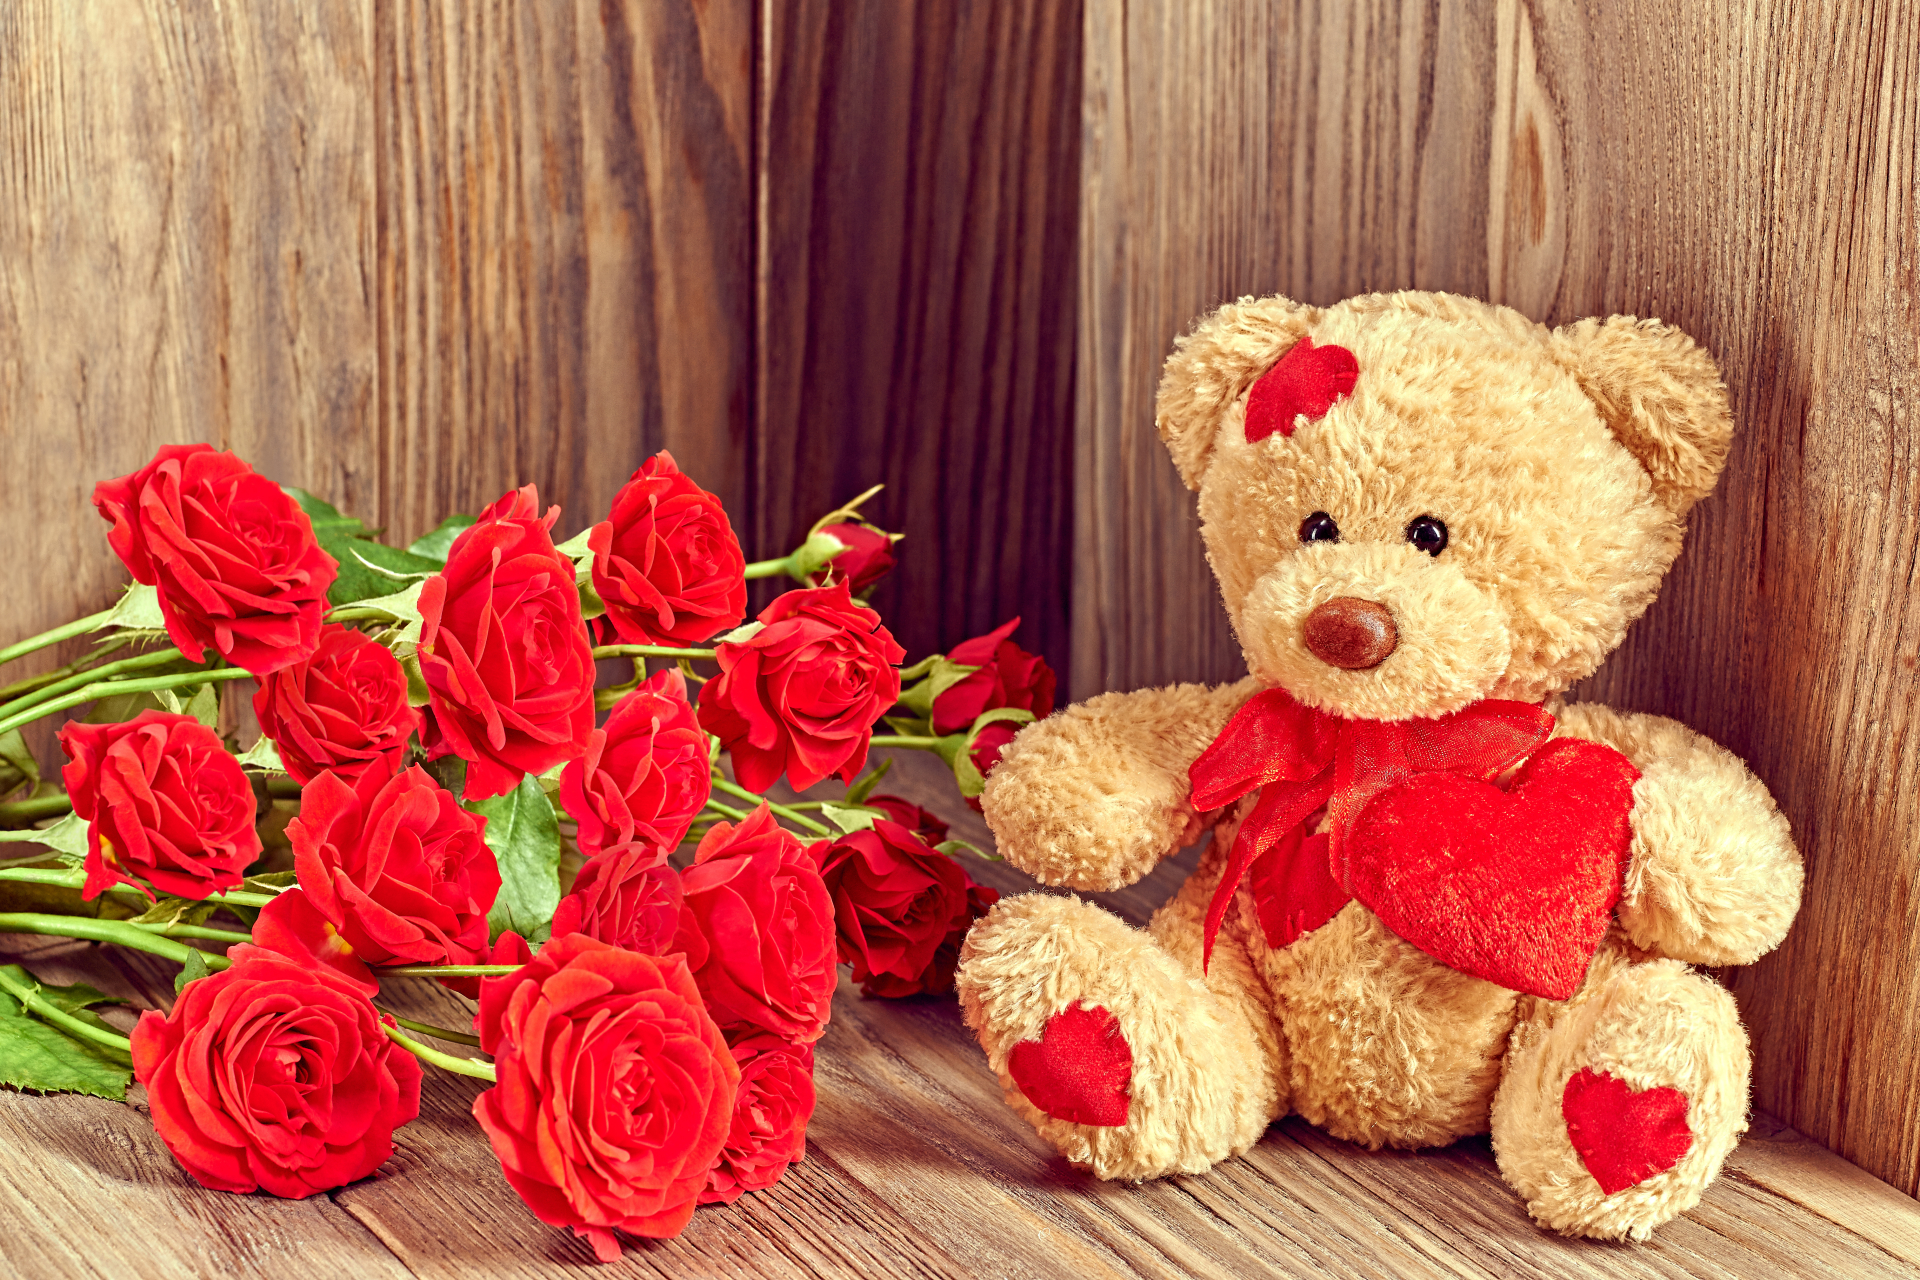 Red Roses Cute Teddy Bear Picture Background Wallpaper , HD Wallpaper & Backgrounds